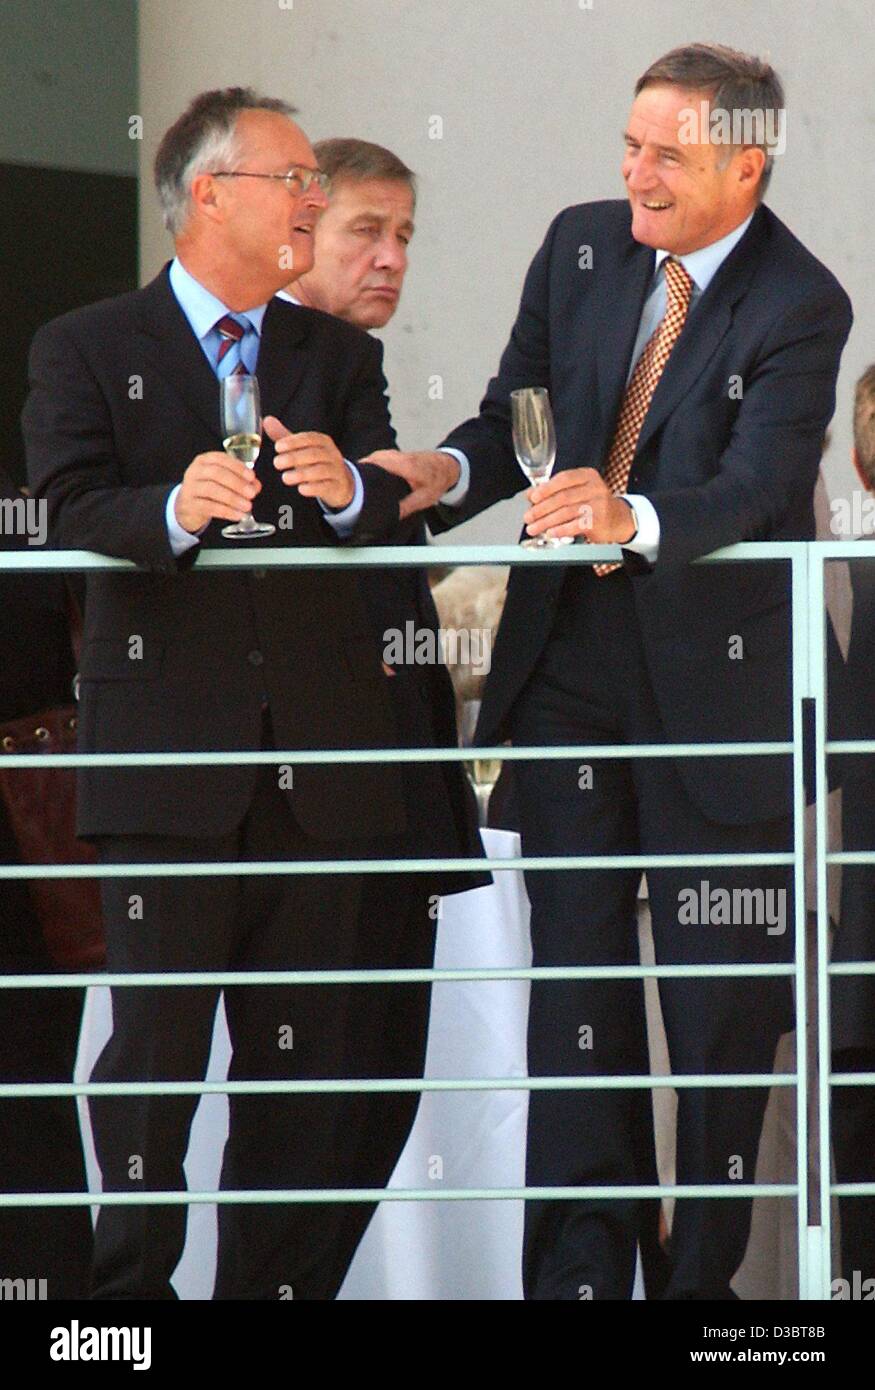 (dpa) - German Finance Minister Hans Eichel (L) holds a glass of champagne in his hand as he chats with his colleague French Minister of Finance Francis Mer (R) while behind them stands German Economy Minister Wolfgang Clement during a joint lunch on the balcony of the German Chancellery in Berlin,  Stock Photo